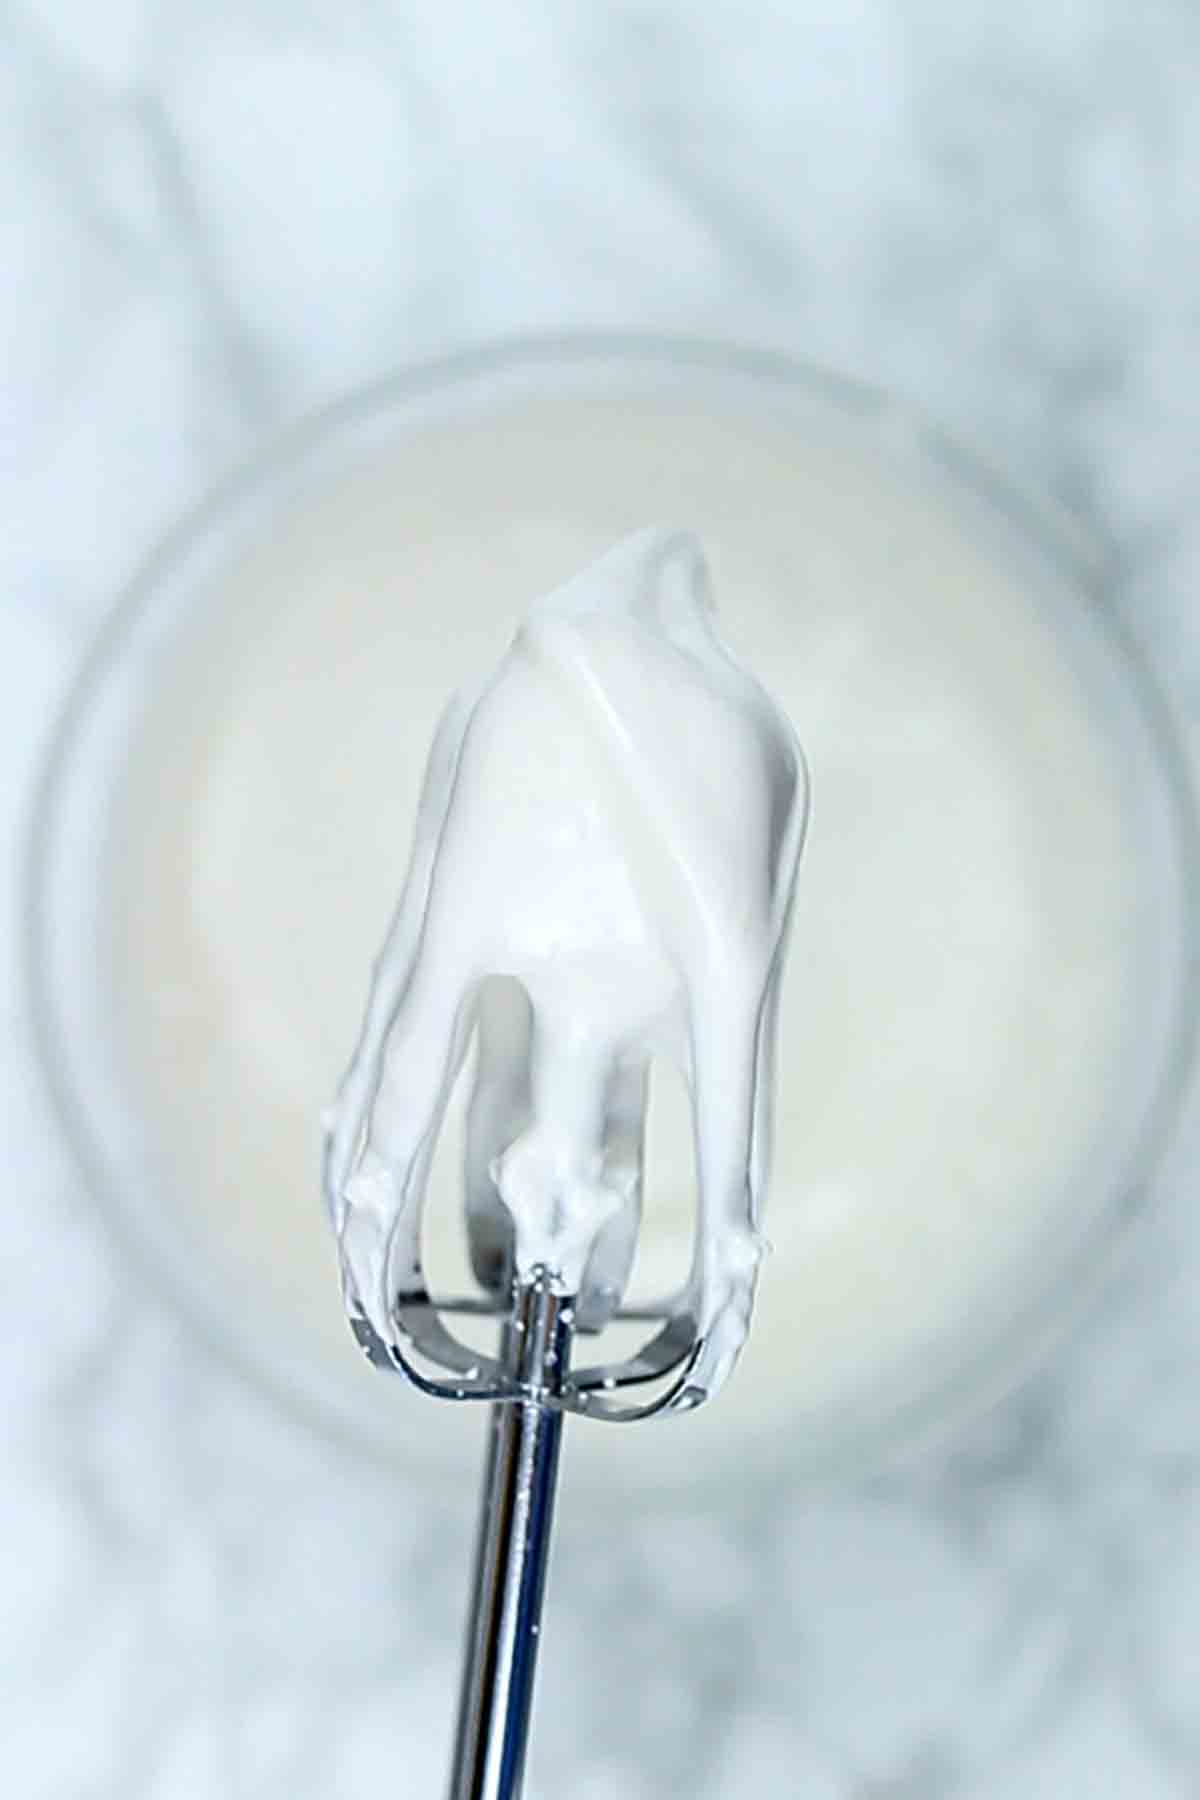 Meringue On The Edge Of A Whisk